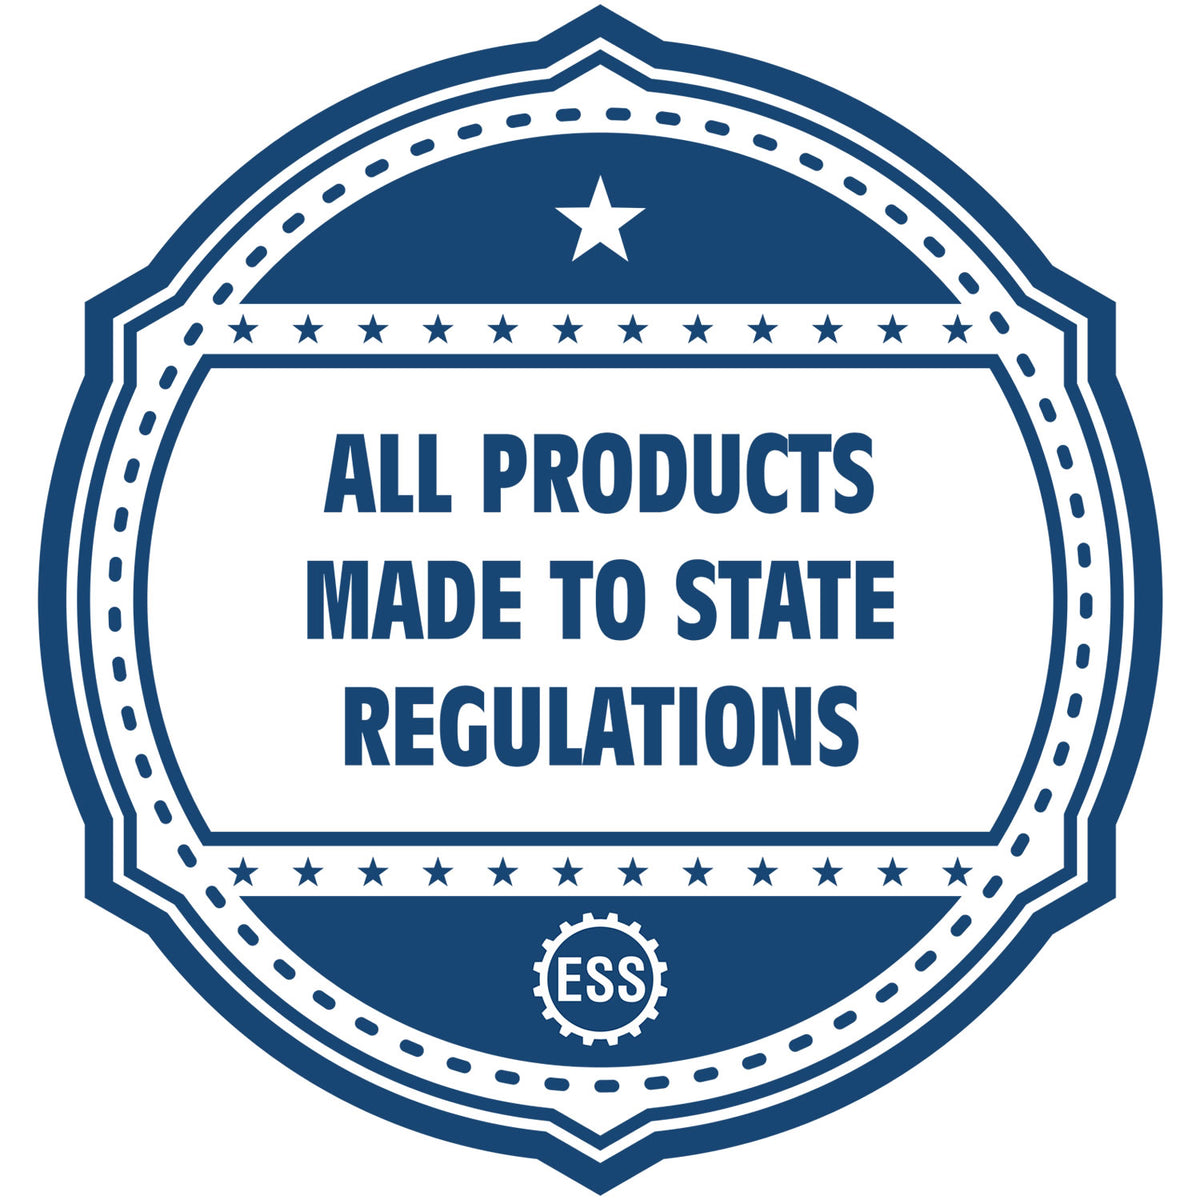 A blue icon or badge for the Gift South Carolina Landscape Architect Seal showing that this product is made in compliance with state regulations.